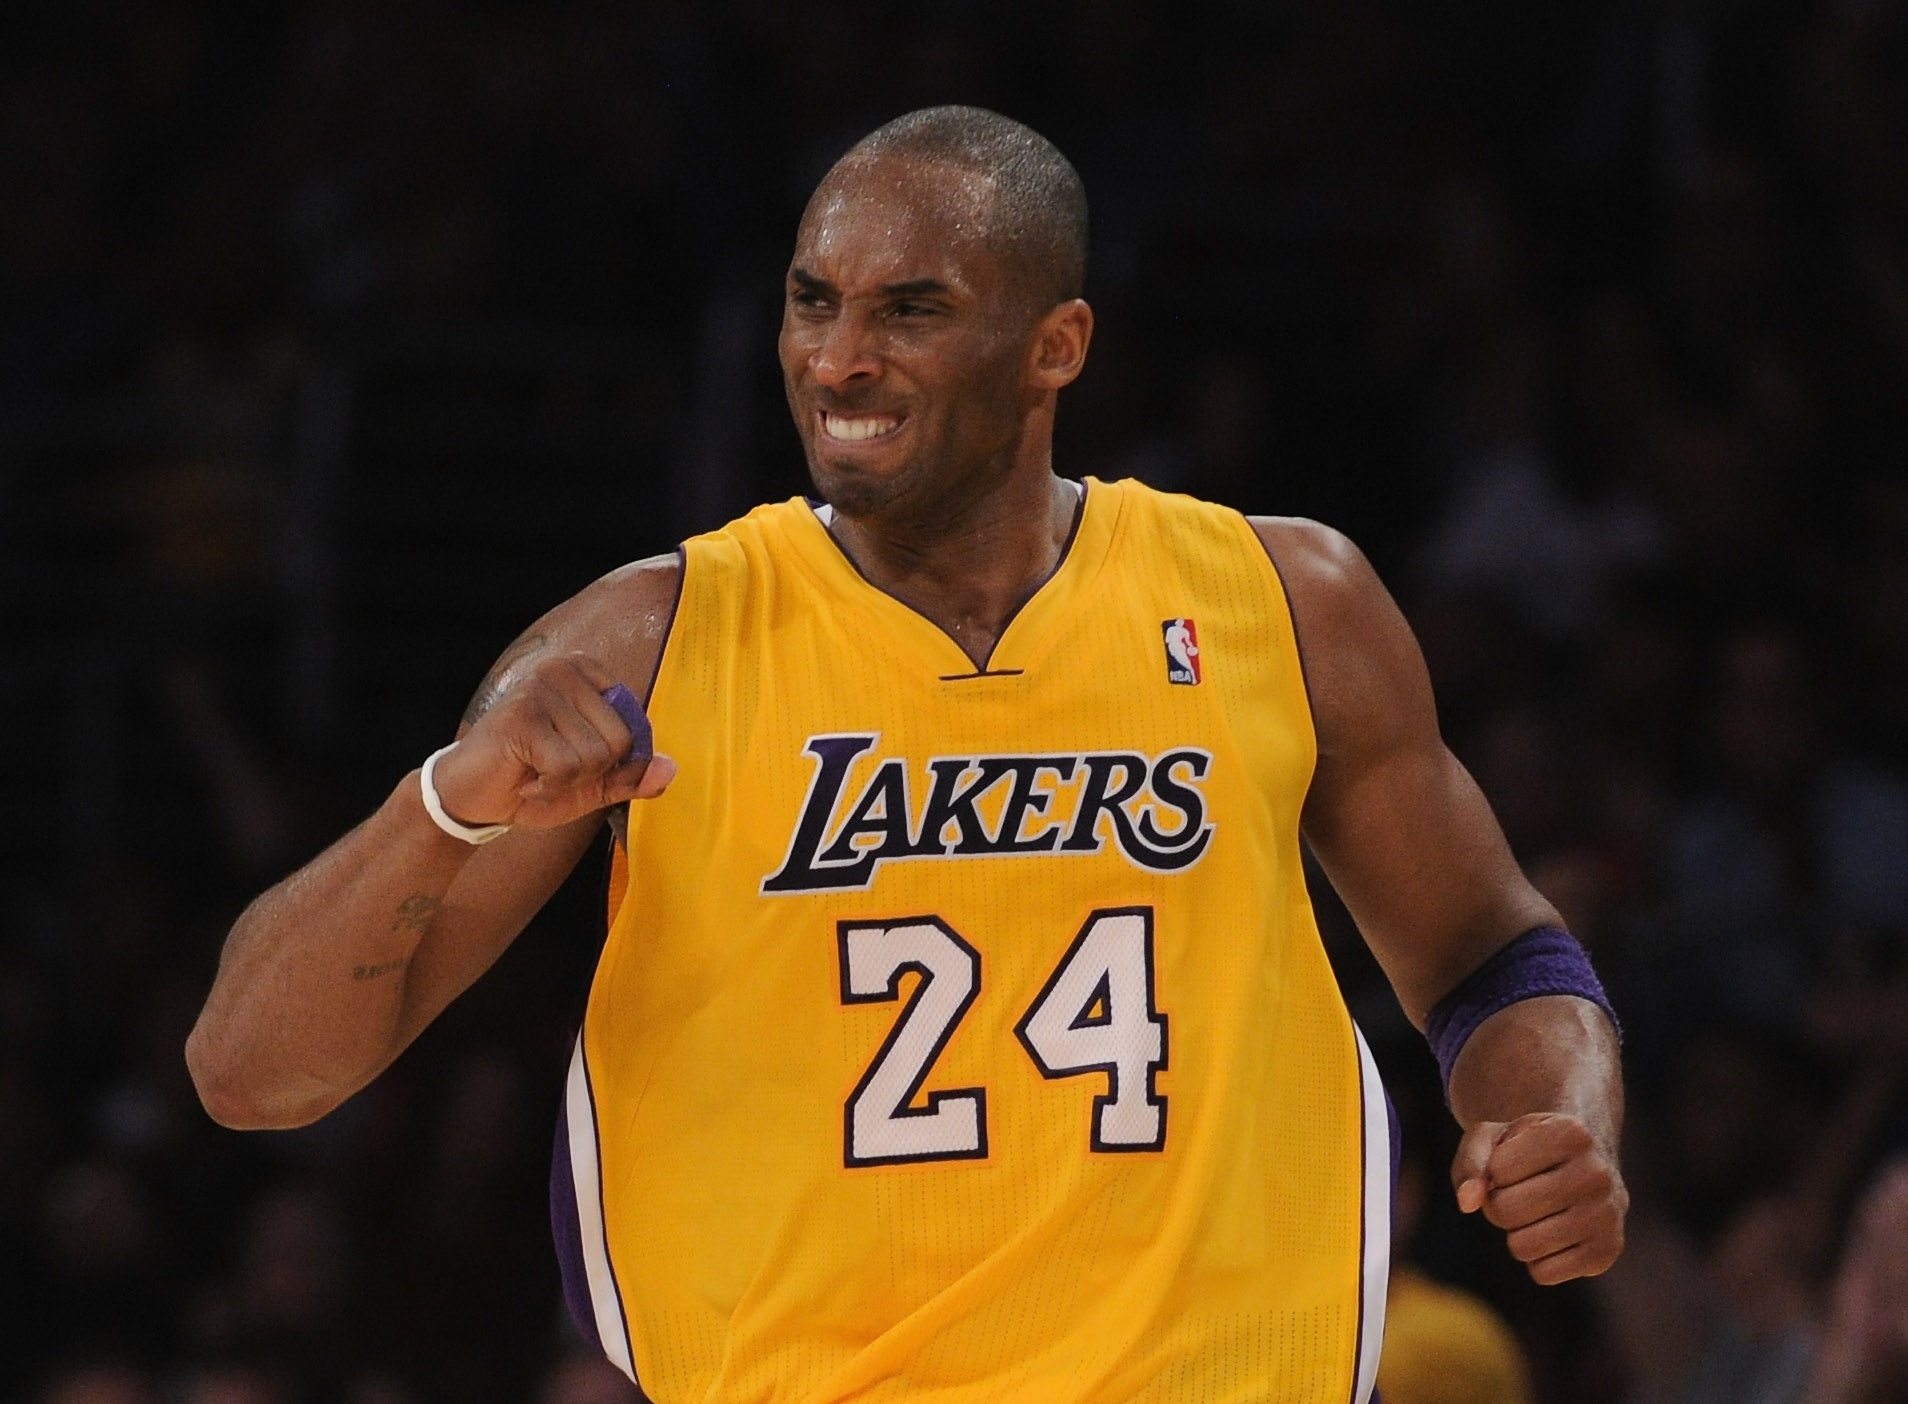 LOS ANGELES, CA - APRIL 12:  Kobe Bryant #24 of the Los Angeles Lakers celebrates his basket during a 102-93 win over the San Antonio Spurs at the Staples Center on April 12, 2011 in Los Angeles, California.  NOTE TO USER: User expressly acknowledges and 